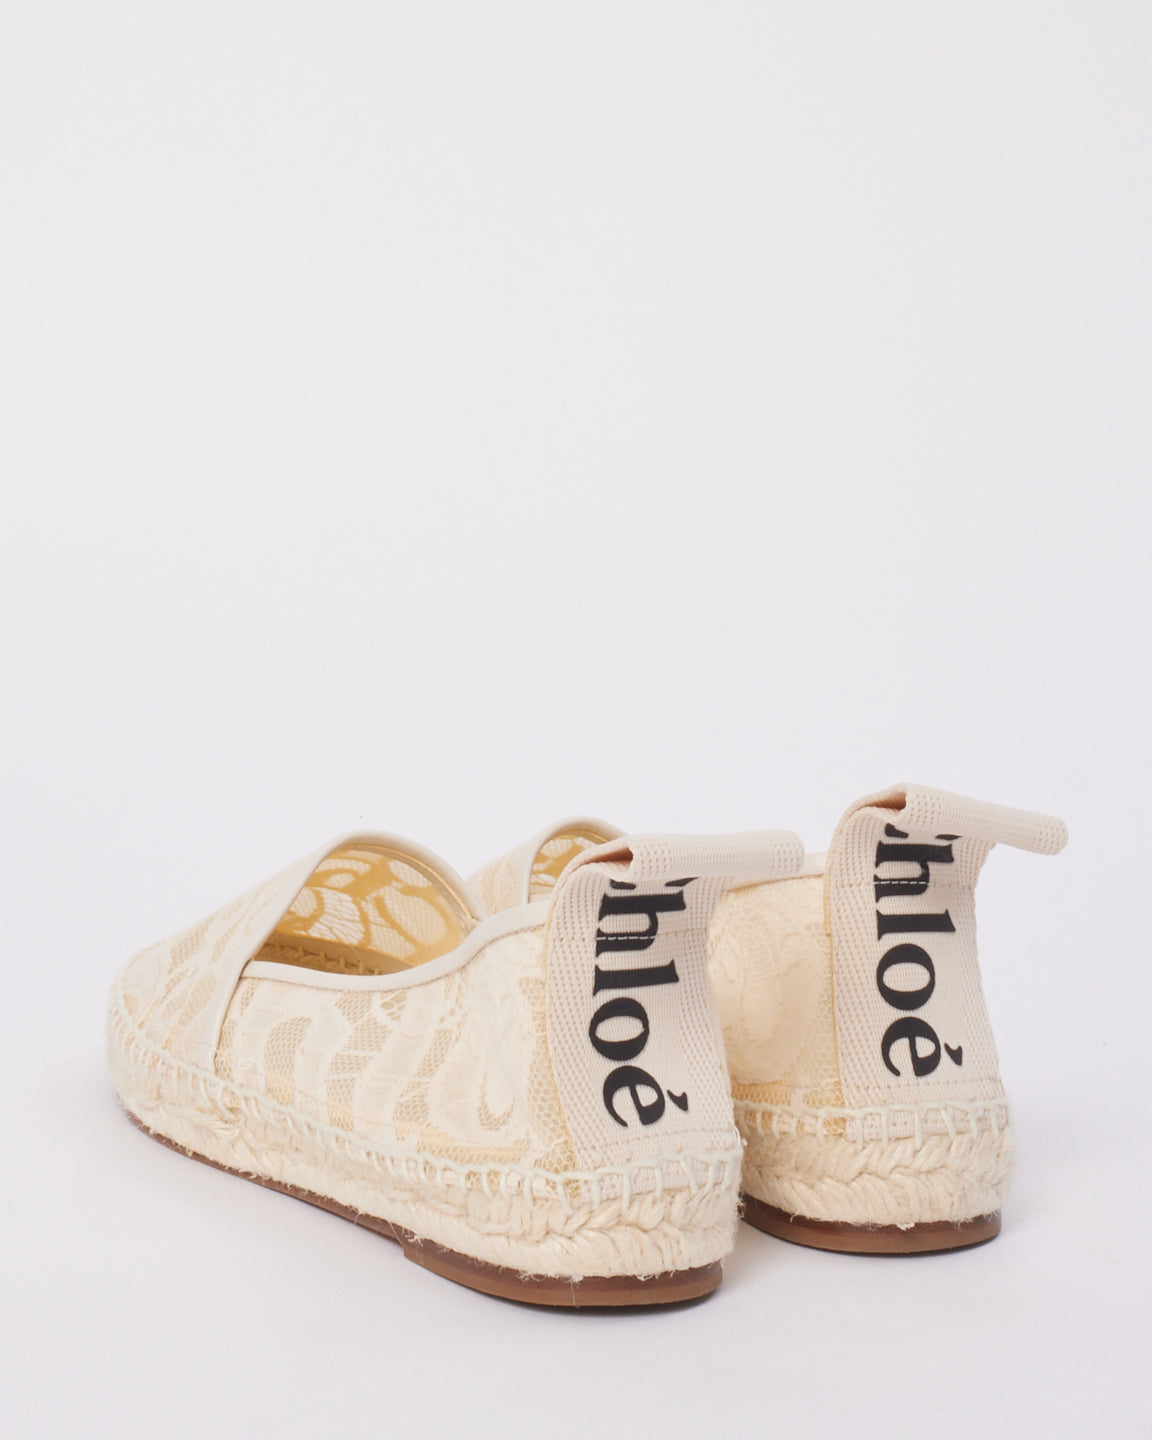 Chloé White Lace Woody Espadrille Shoes - 37